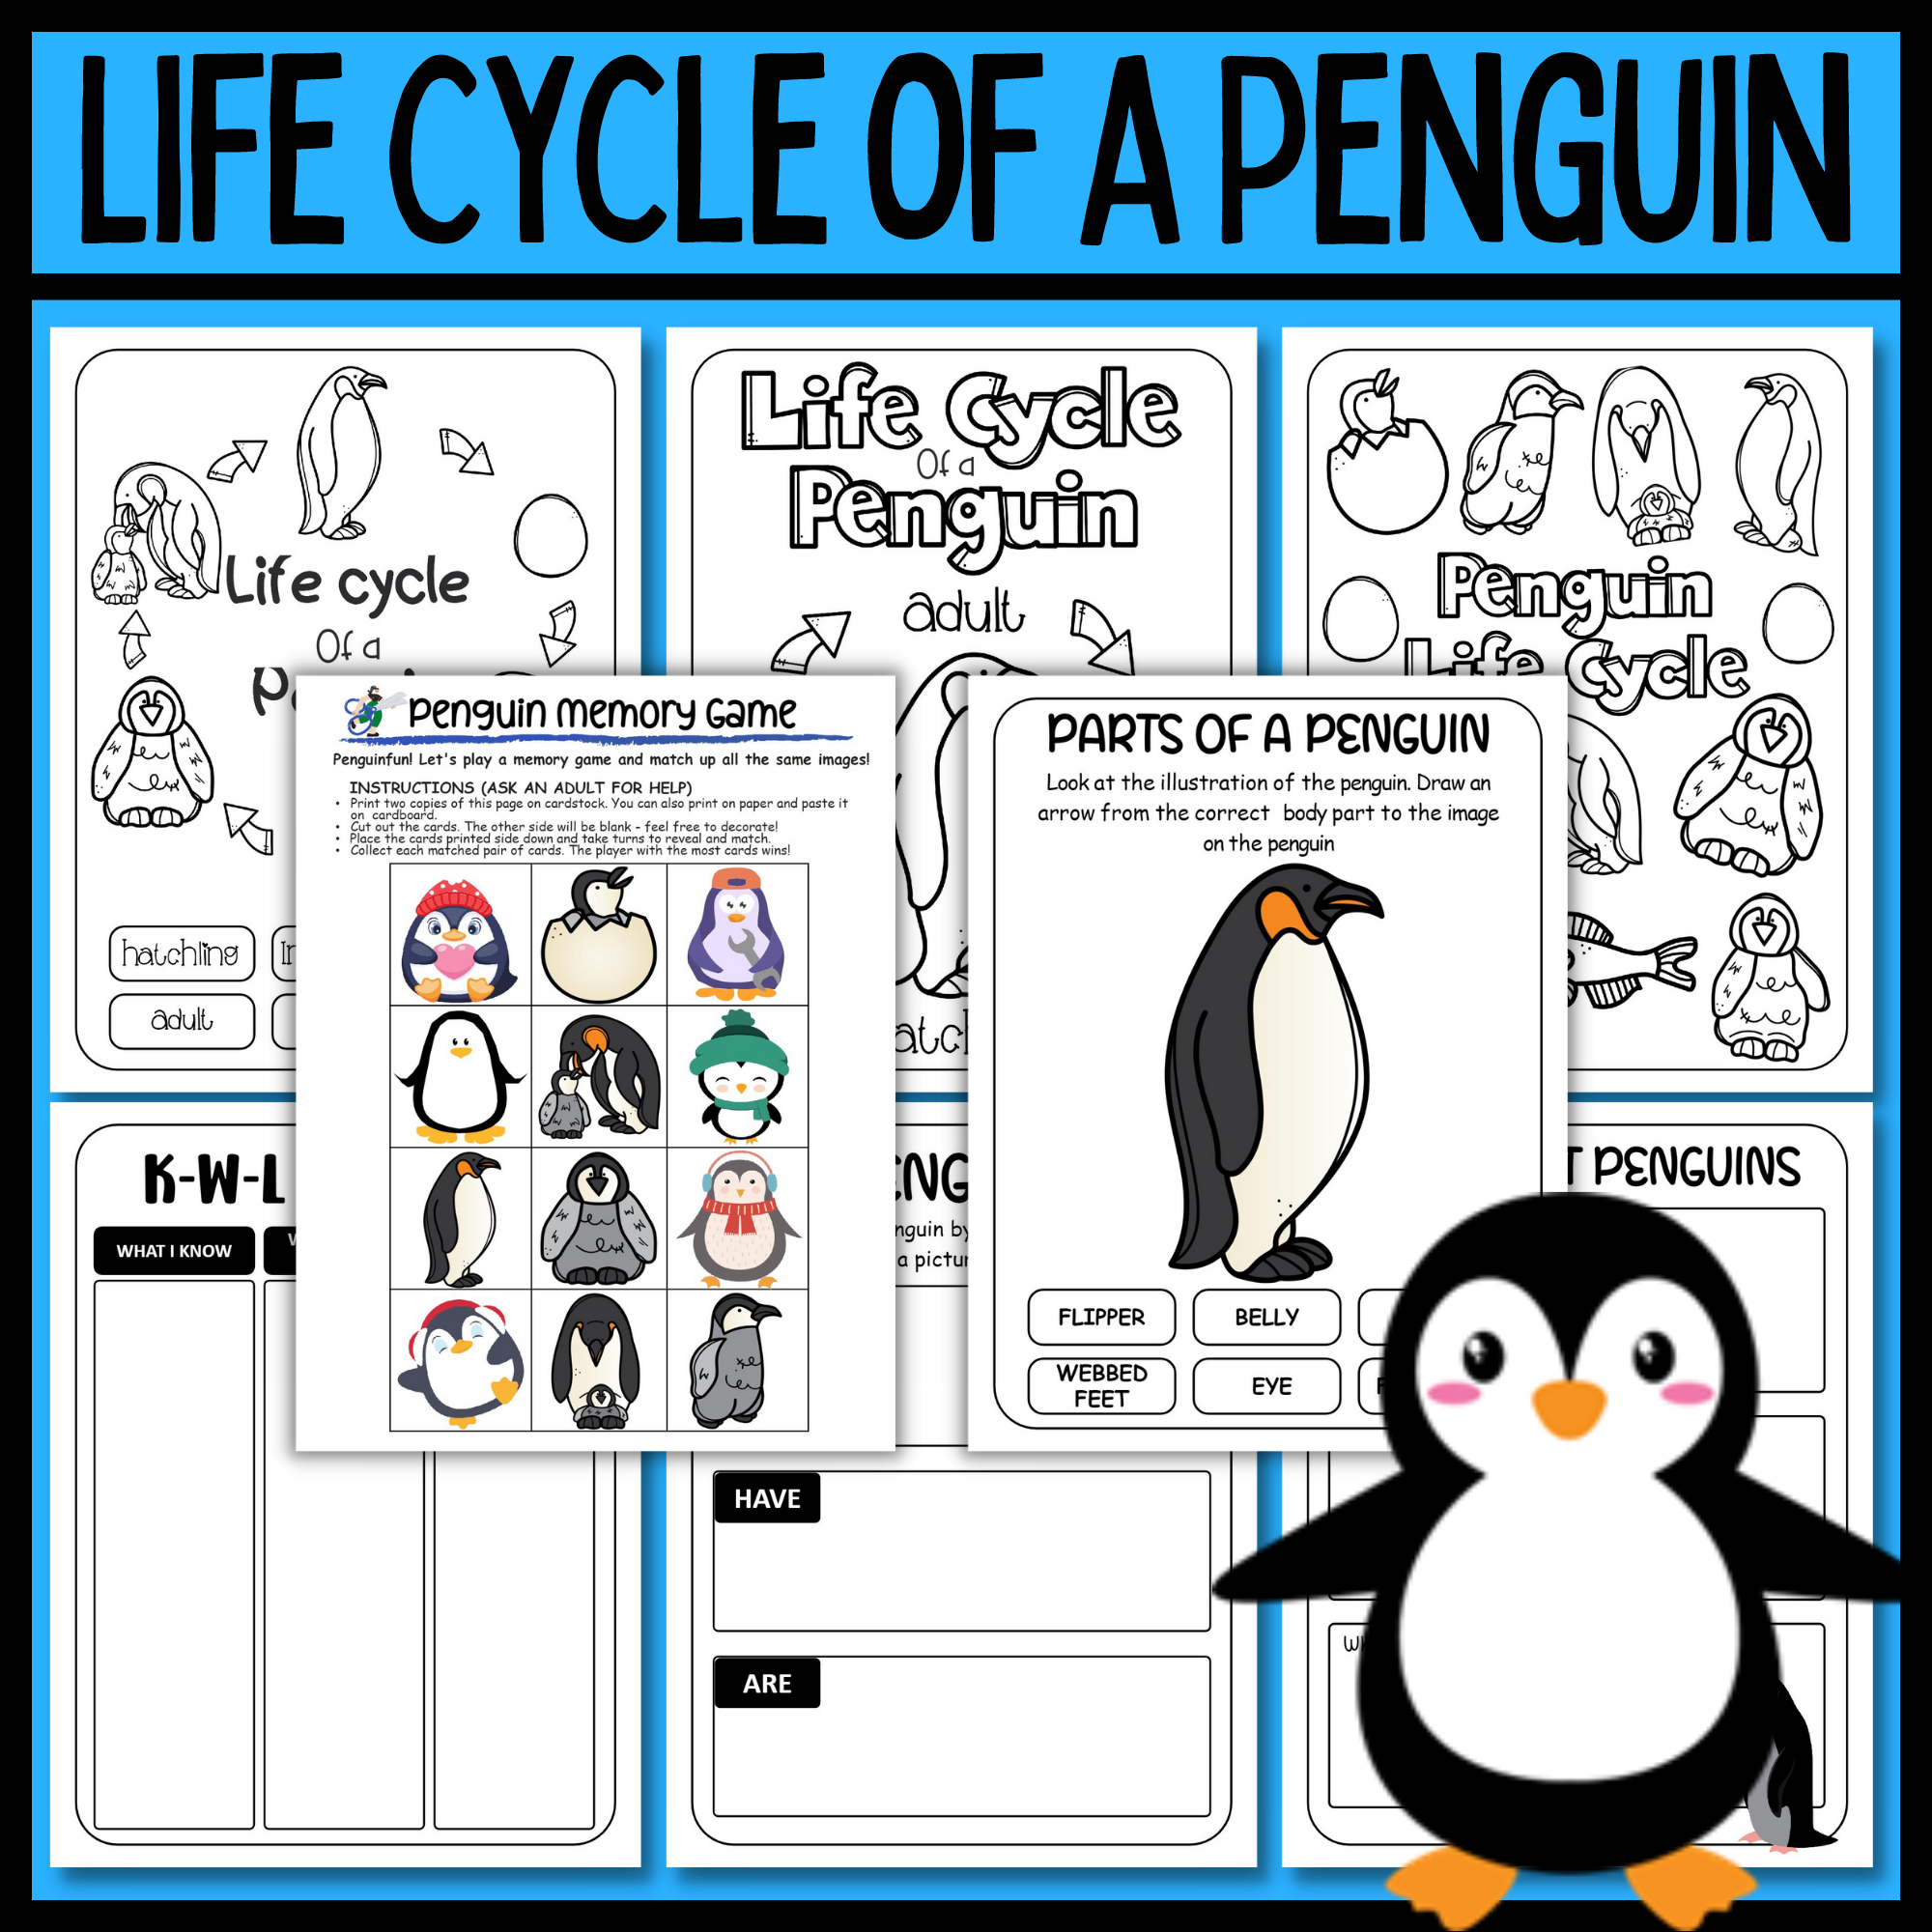 Life cycle of a penguin worksheets world penguin day made by teachers